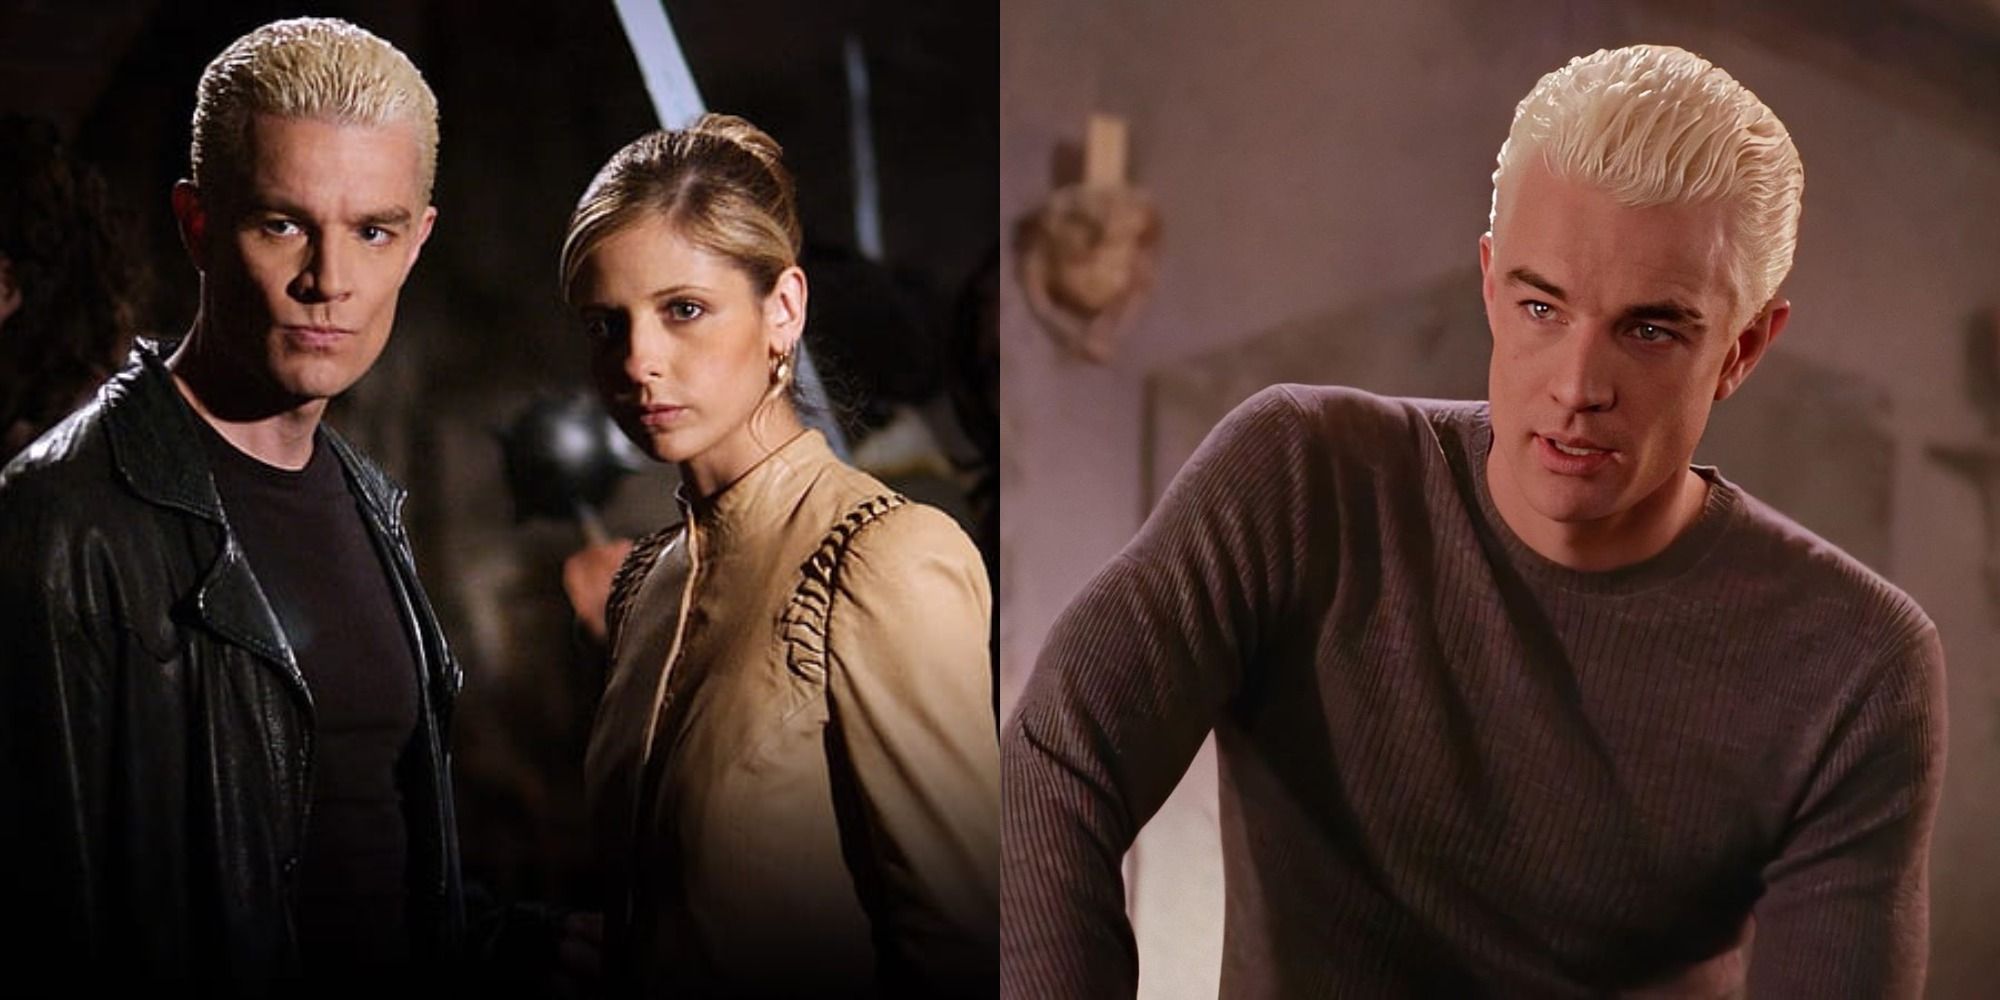 Split image of Buffy and Spike looking concerned and an image of Spike alone from Buffy the Vampire slayer